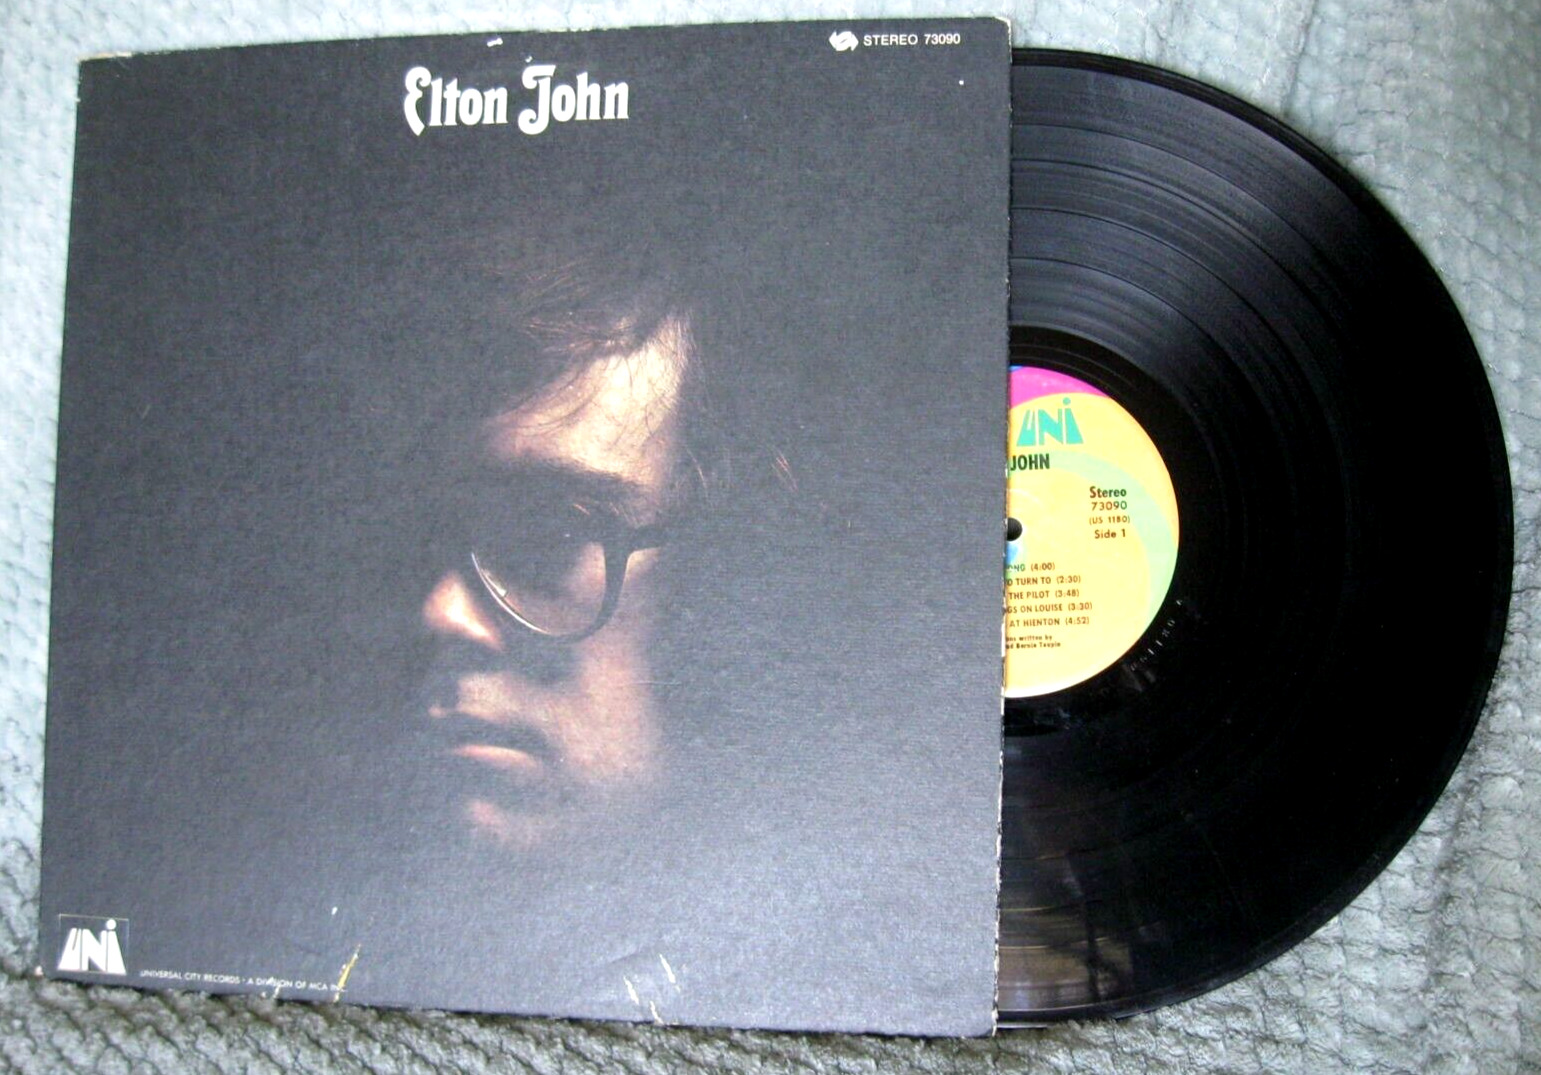 ELTON JOHN Self-Titled LP Vinyl Record UNI 1970 VG+ YOUR SONG/SIXTY YEARS ON...